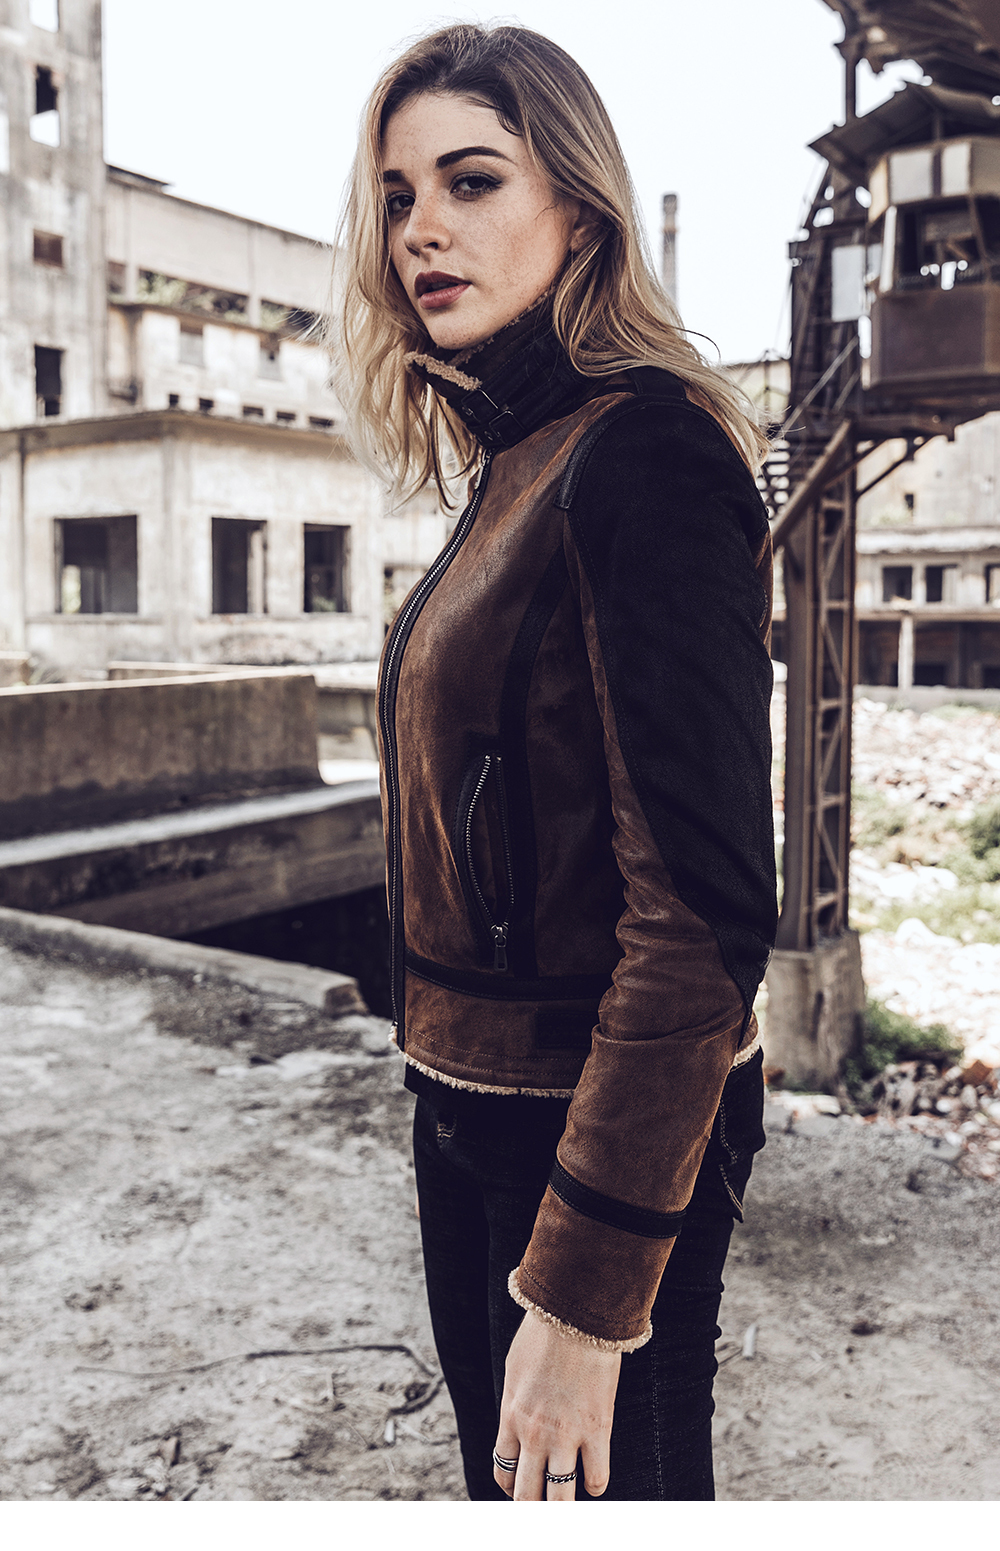 FLAVOR Women Real Leather Jacket with Faux Fur Shearling Genuine Leather Motorcycle Jacket W17-60 